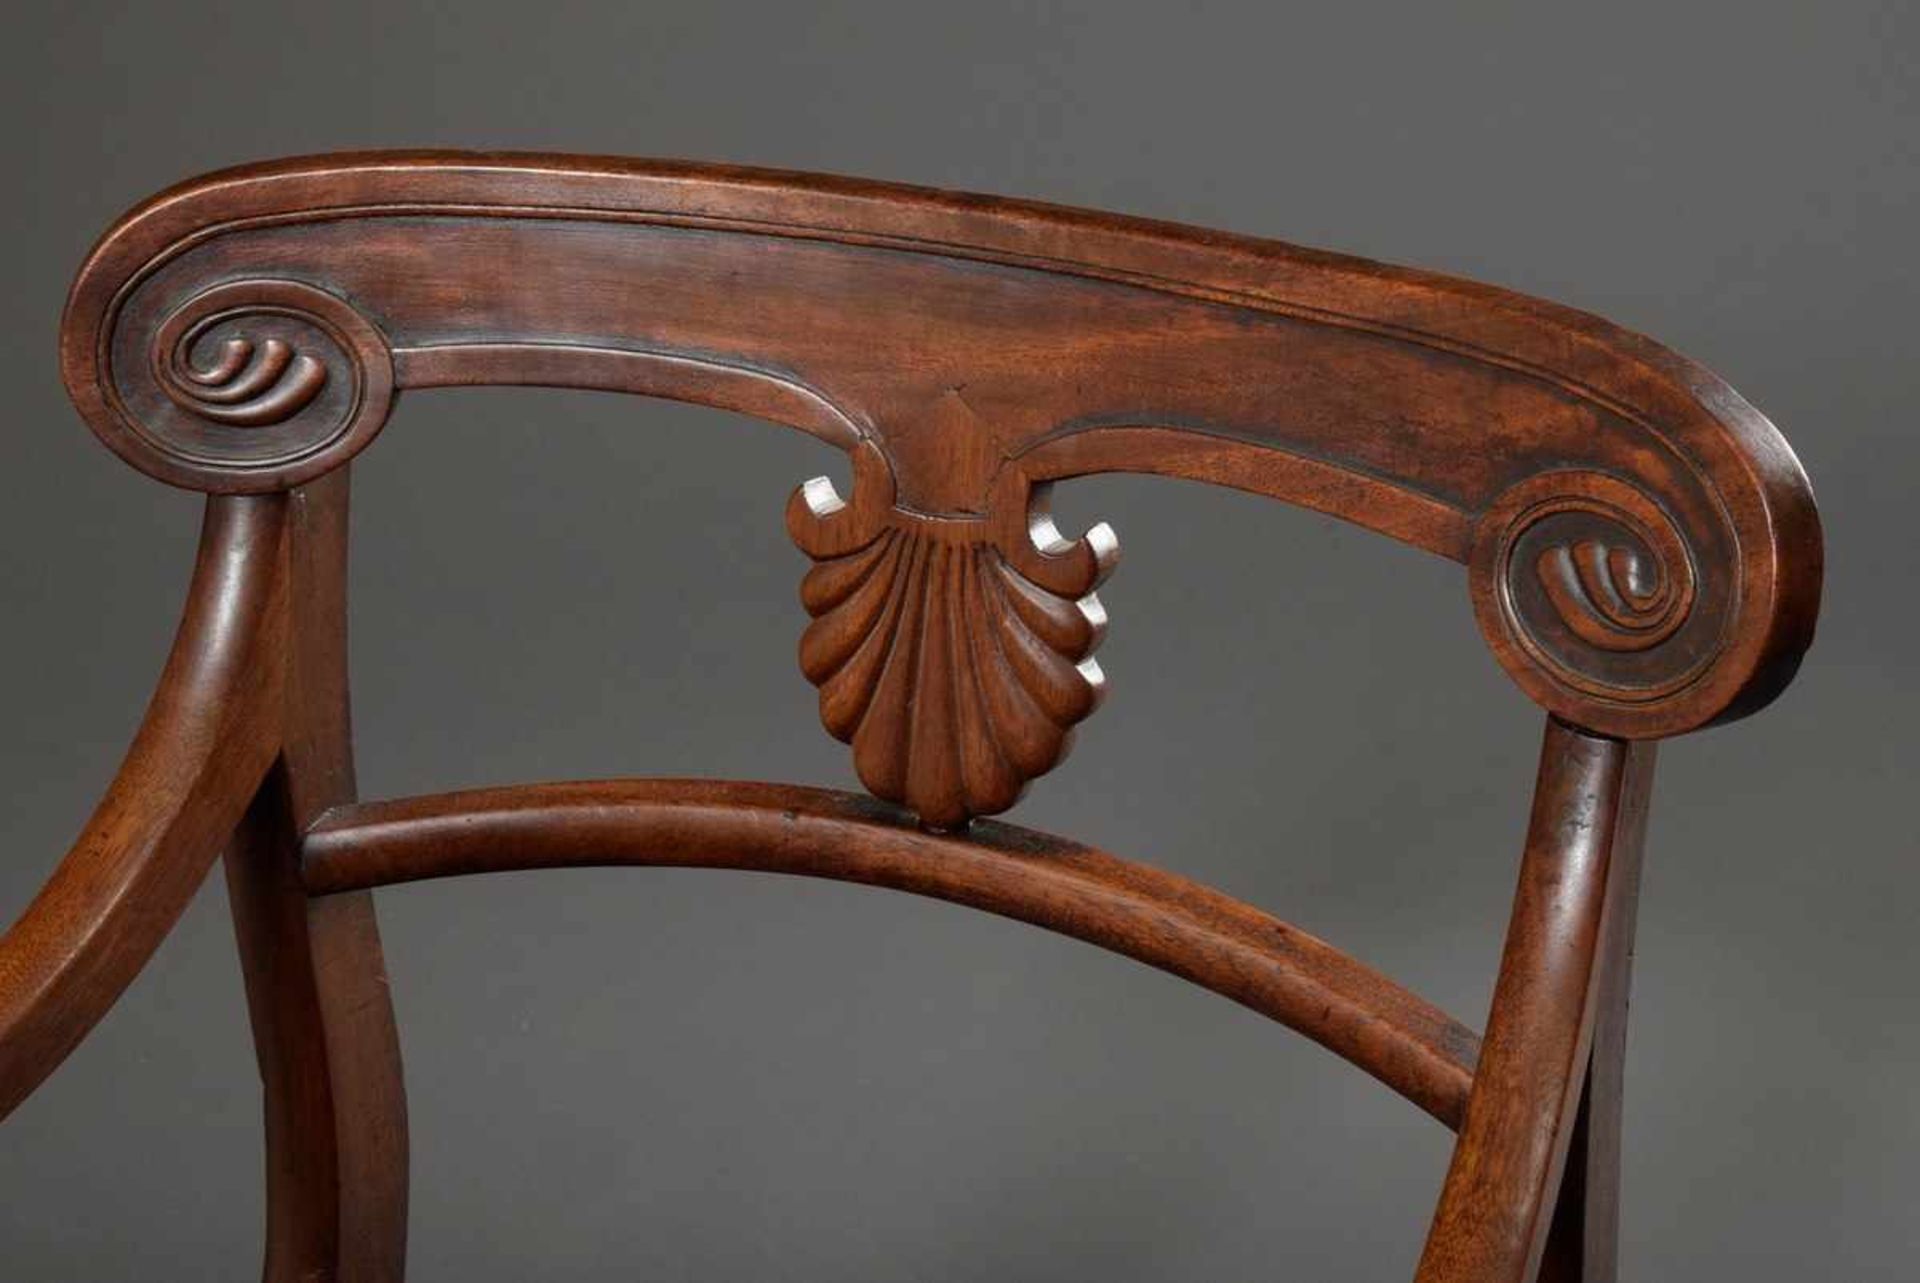 5 English Sheraton chairs with carved backrests and sabre legs, 1x with armrests, mahogany, - Image 7 of 7